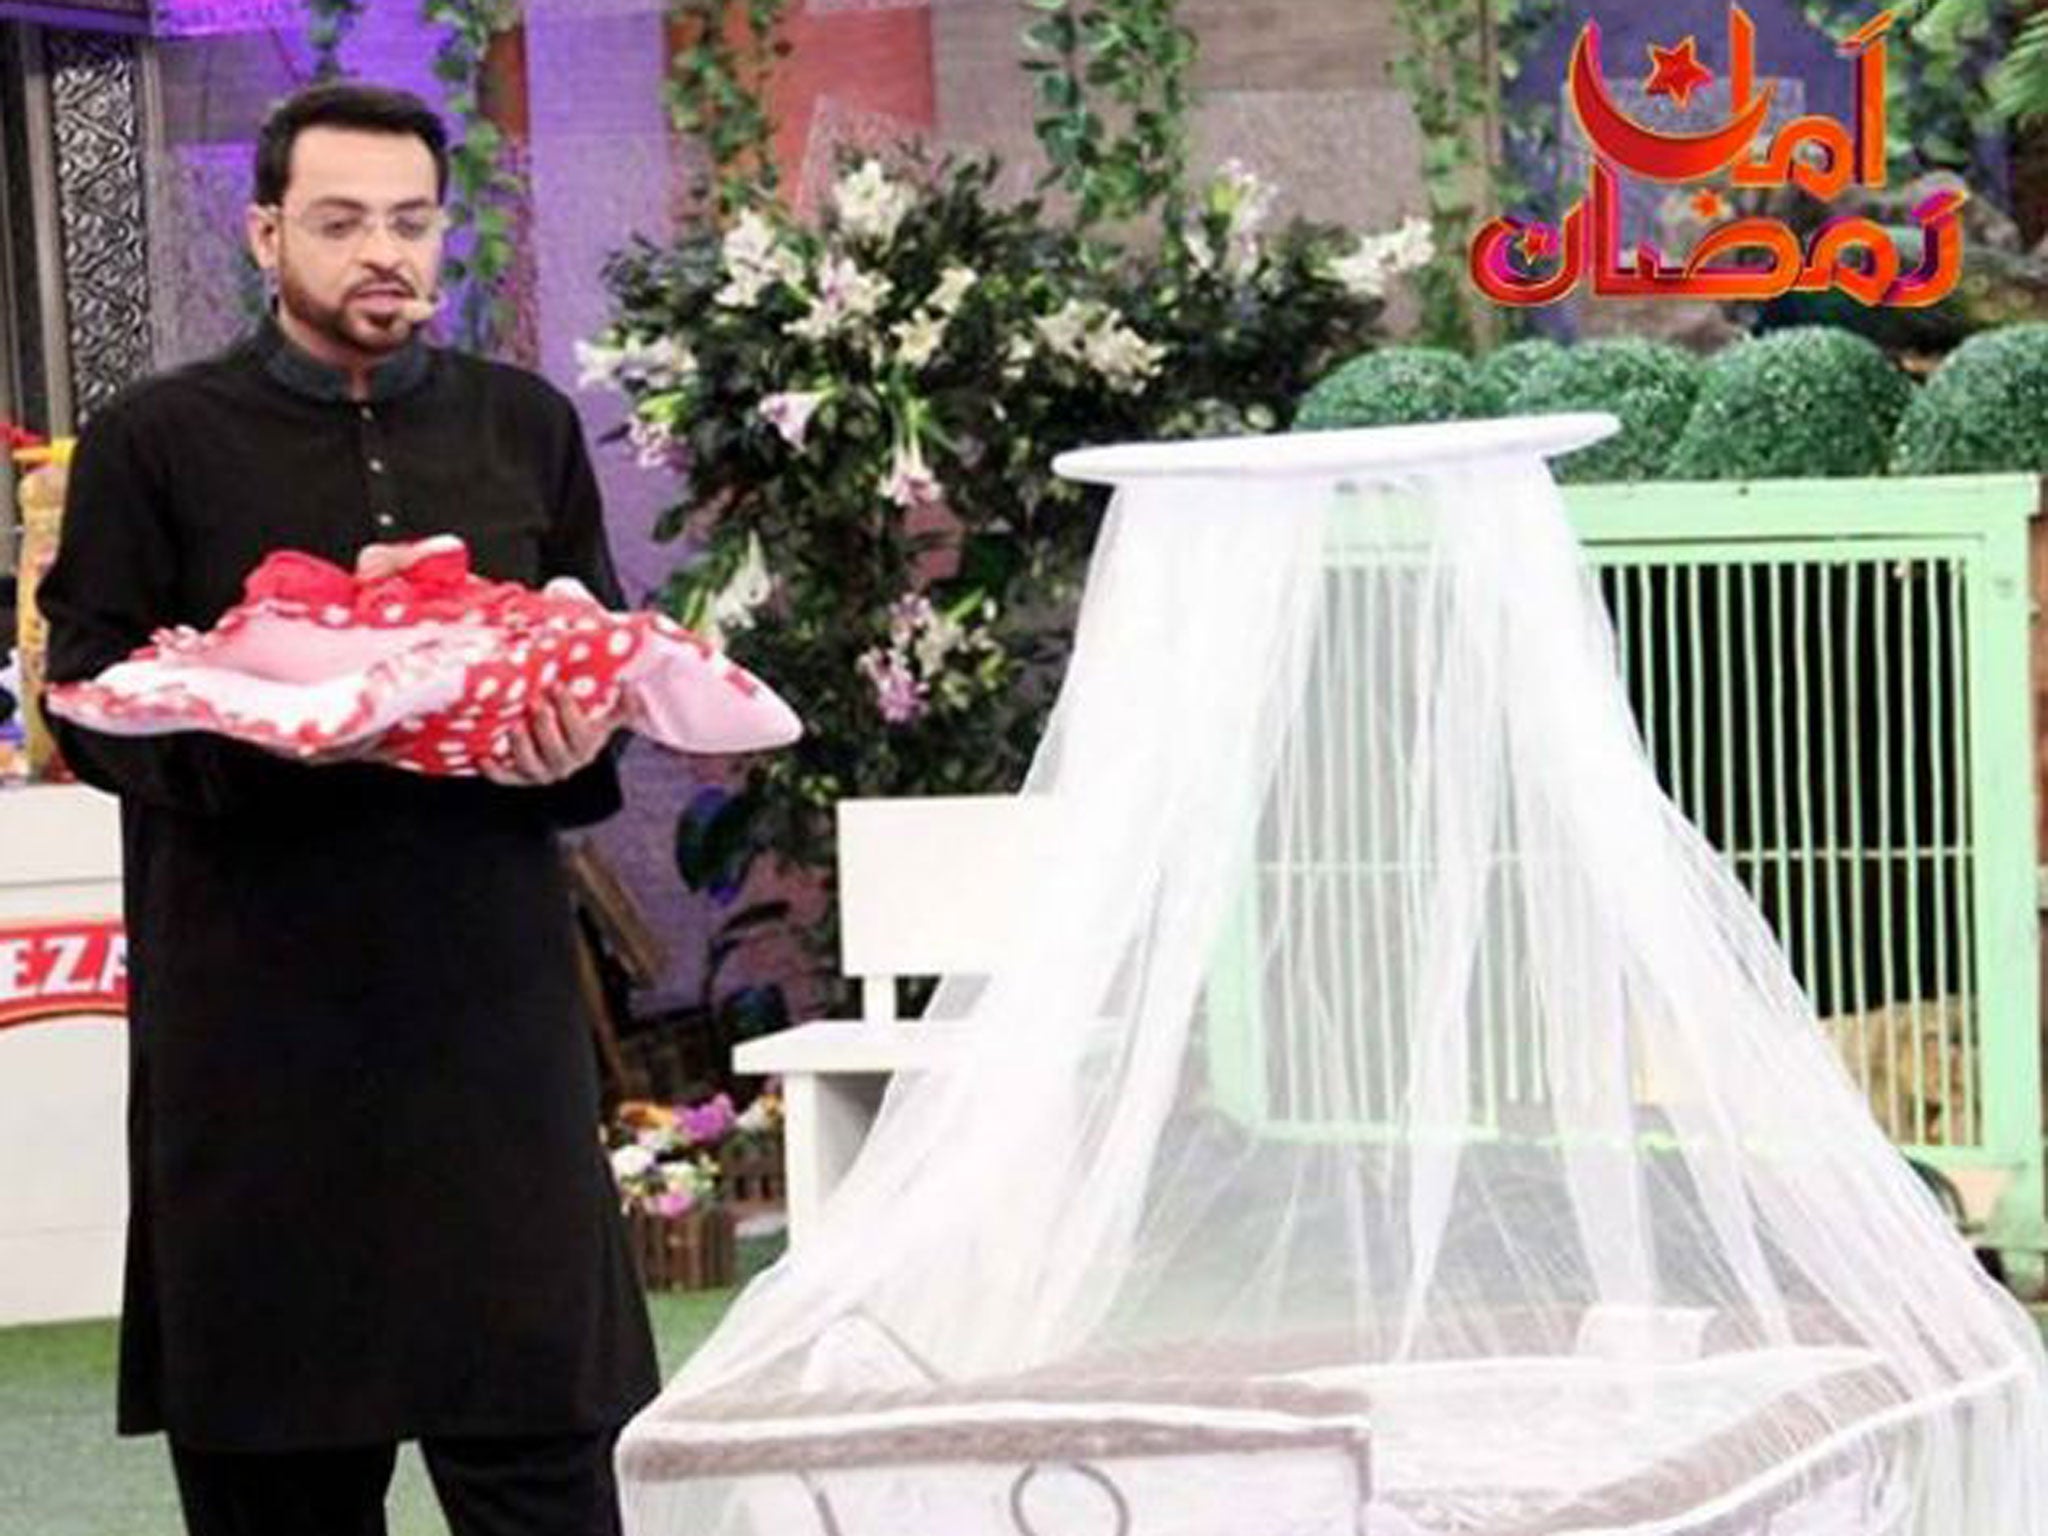 Aamir Liaquat Hussain, the host of talk show “Amaan Ramazan”, has given away two abandoned babies so far during the holy month.